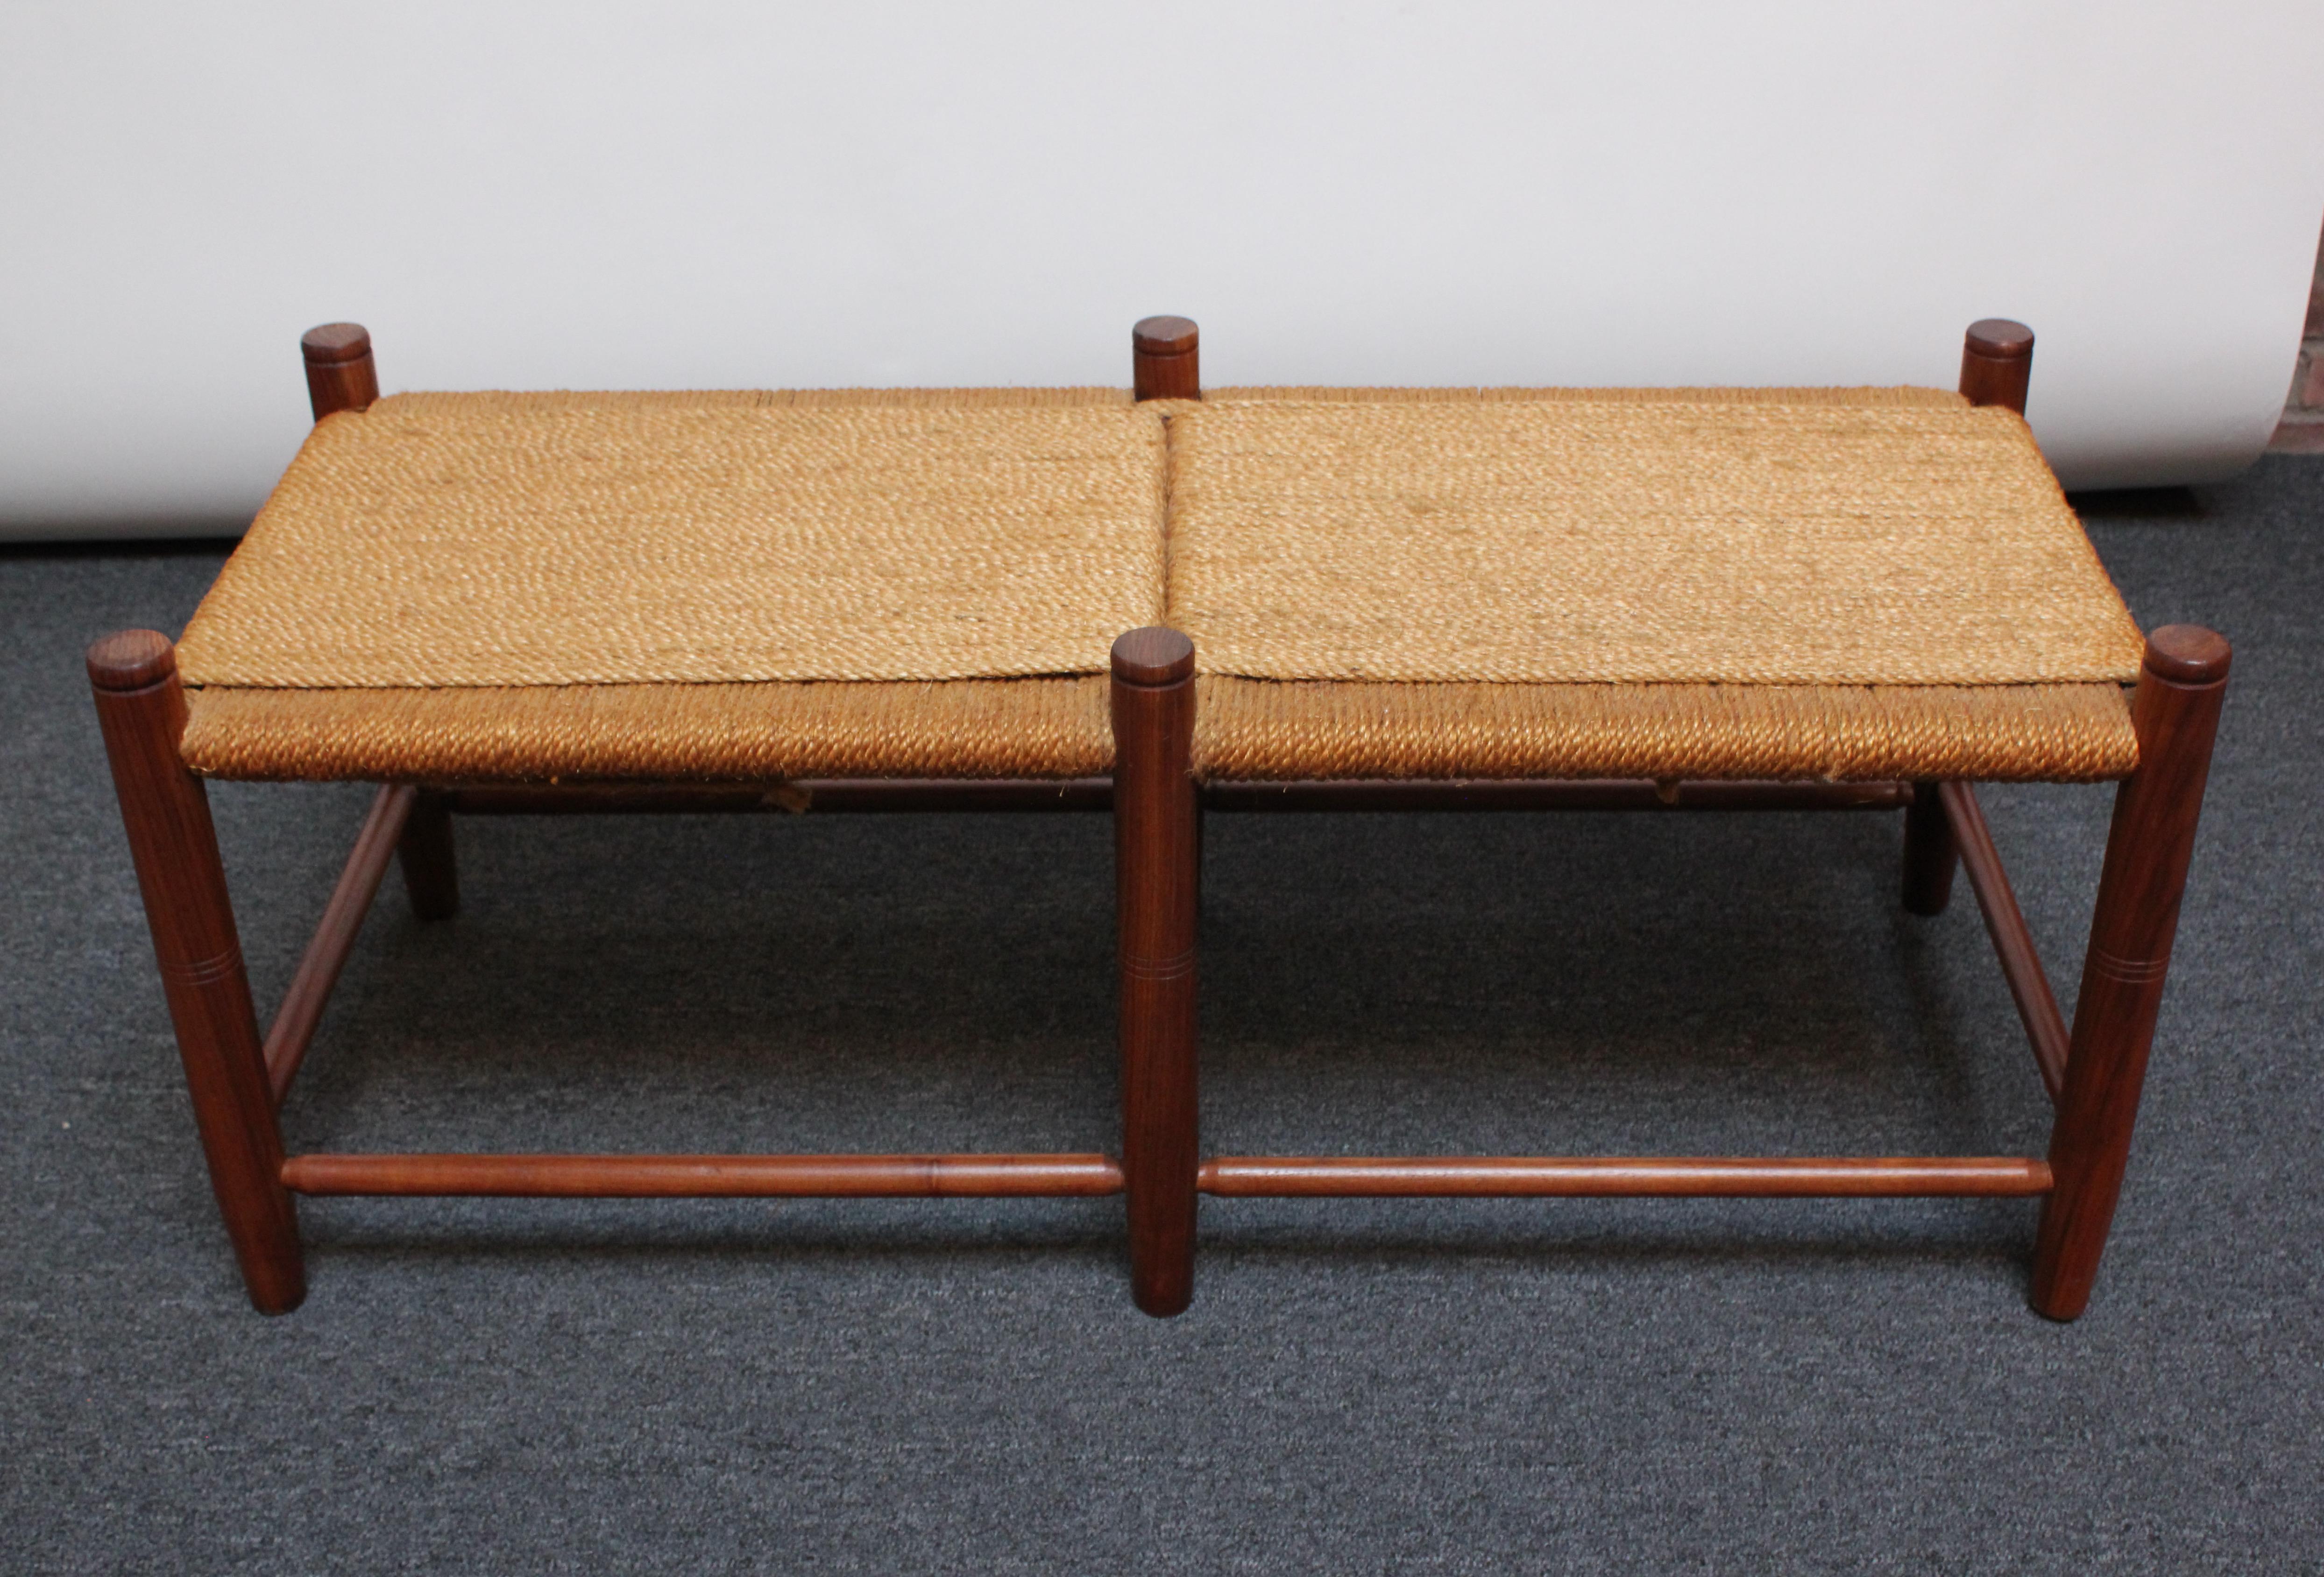 Solid teak bench with woven rope seat (ca. 1970s / 1980s, USA). Teak has been conservatively refinished; rope is in very good, original condition.
Measures: H: 18.75